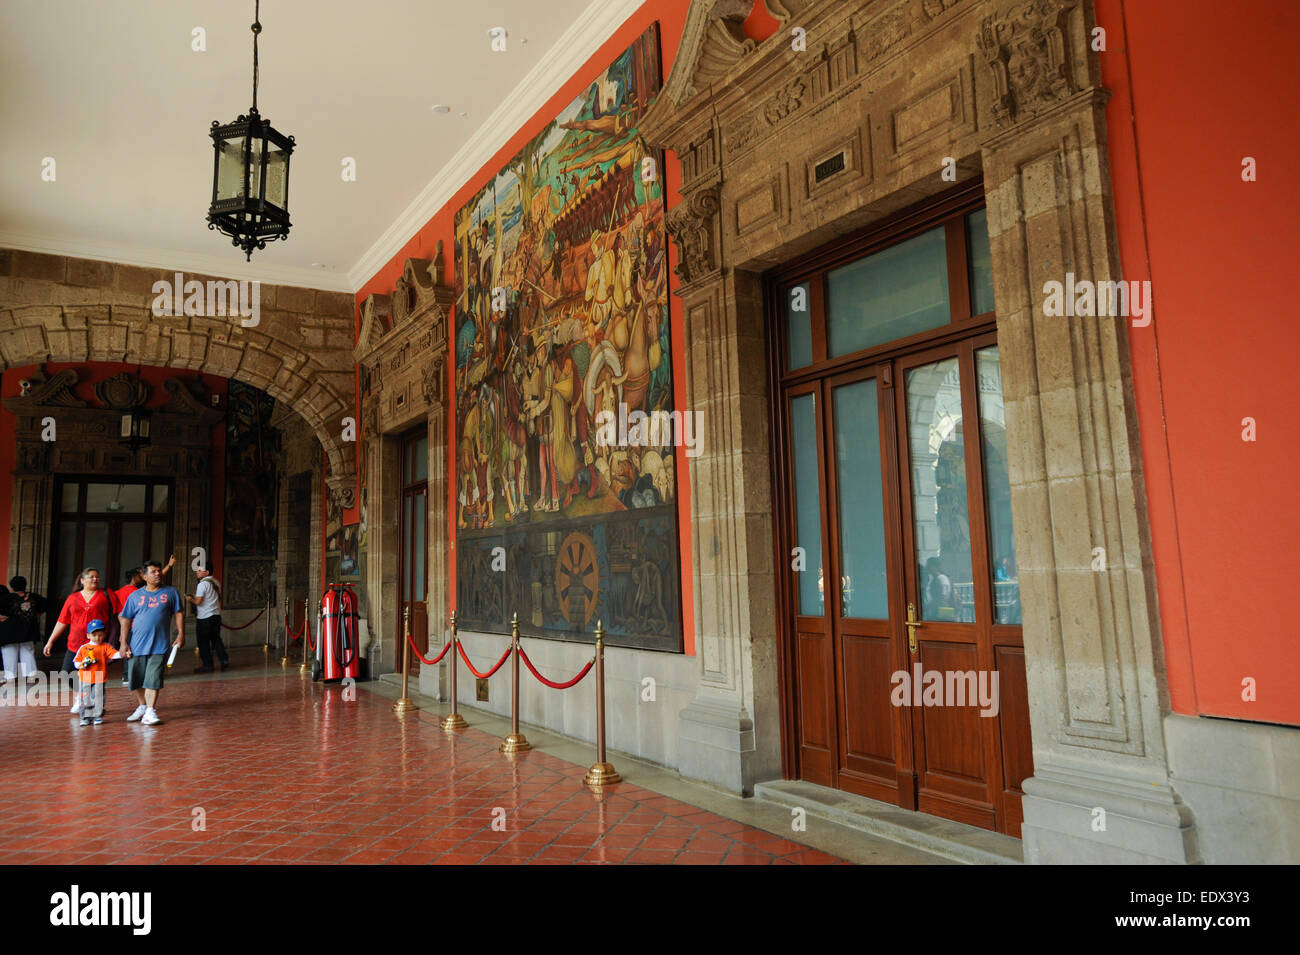 Diego Rivera mural at the National Palace in Mexico City, Mexico. Paintings showing life in ancient Mexico. Stock Photo